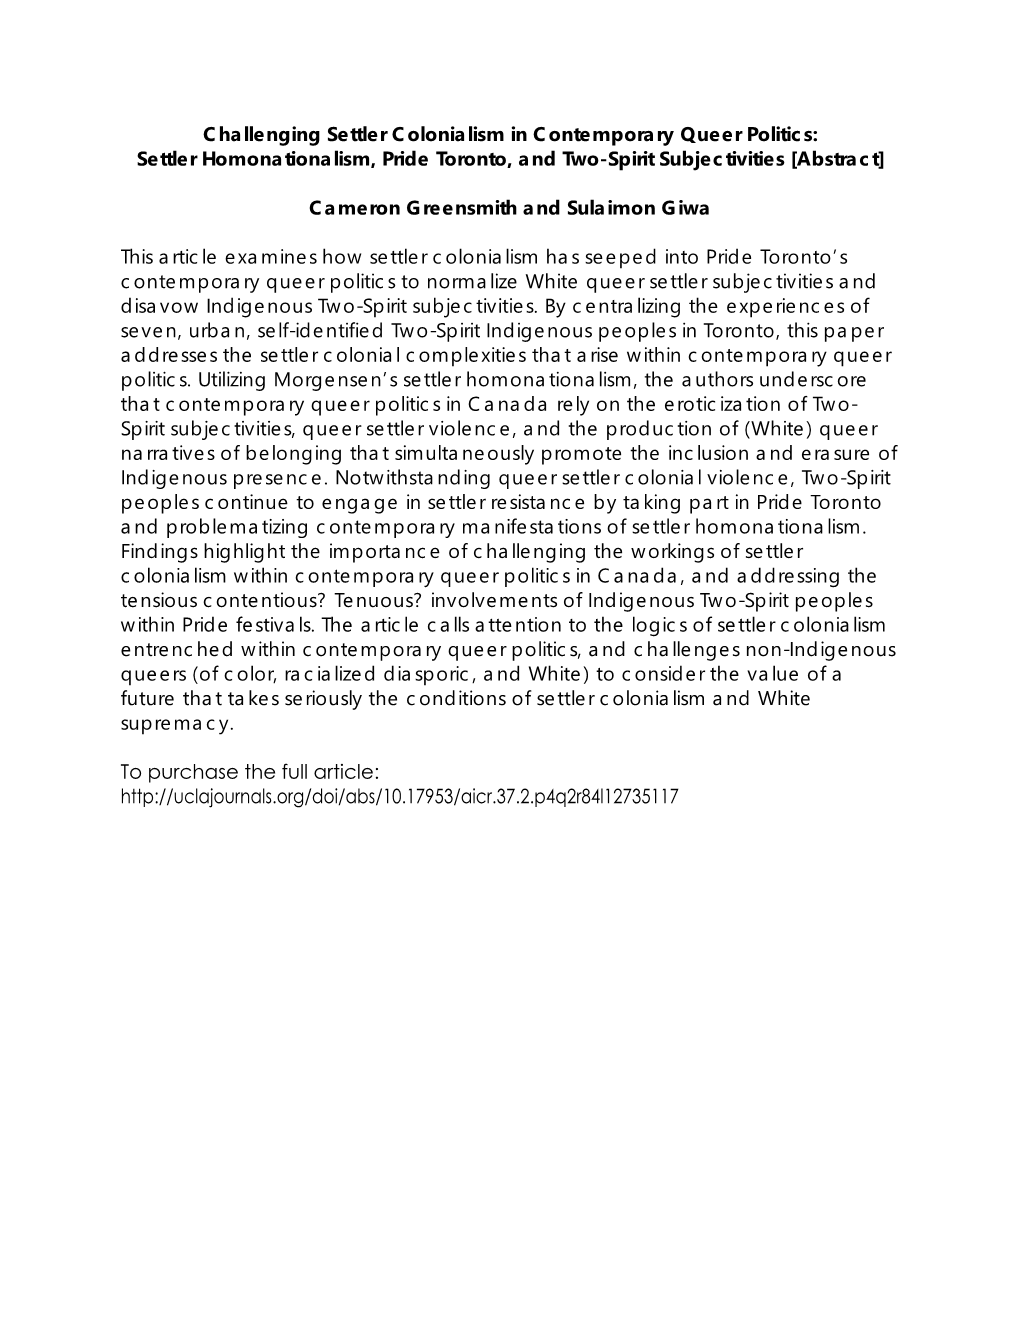 Challenging Settler Colonialism in Contemporary Queer Politics: Settler Homonationalism, Pride Toronto, and Two-Spirit Subjectivities [Abstract]